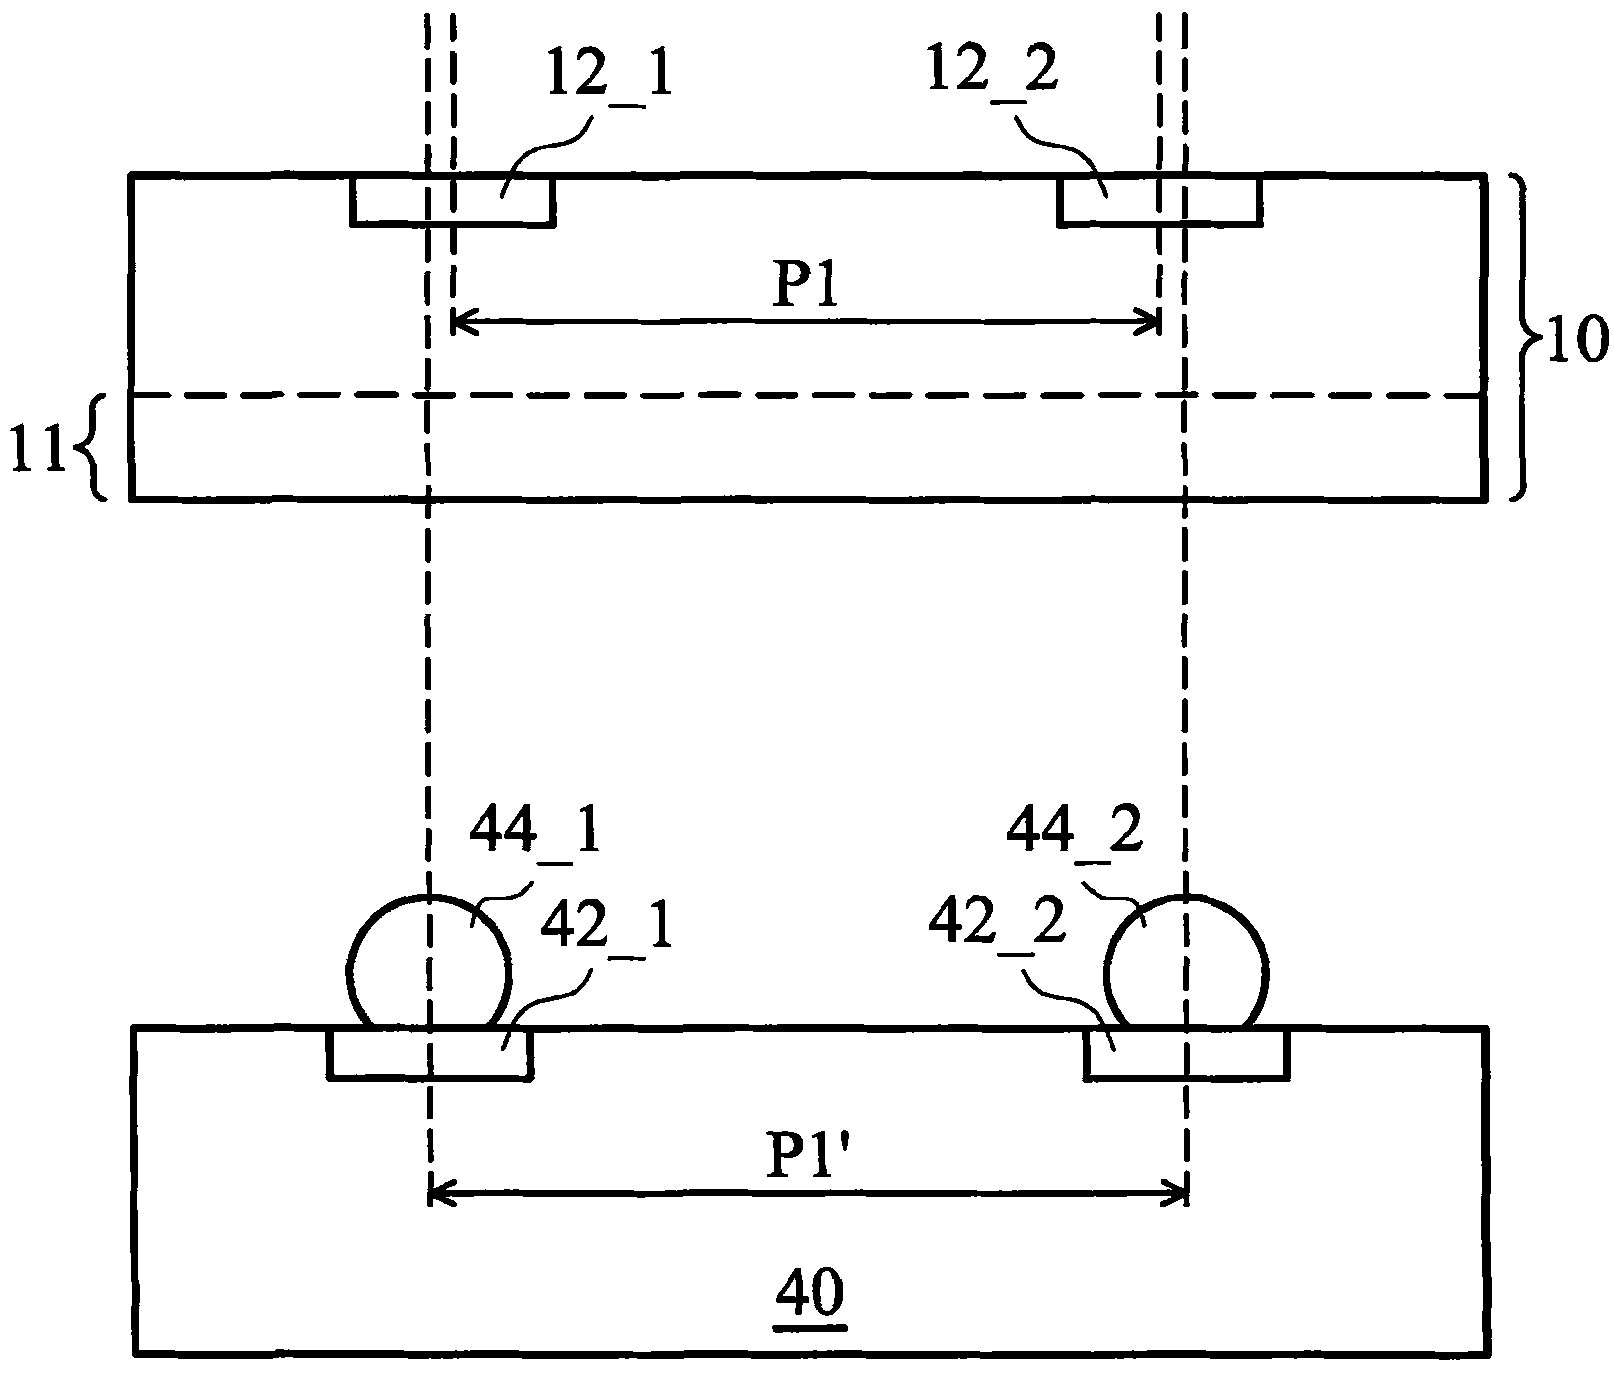 Integrated circuit structure